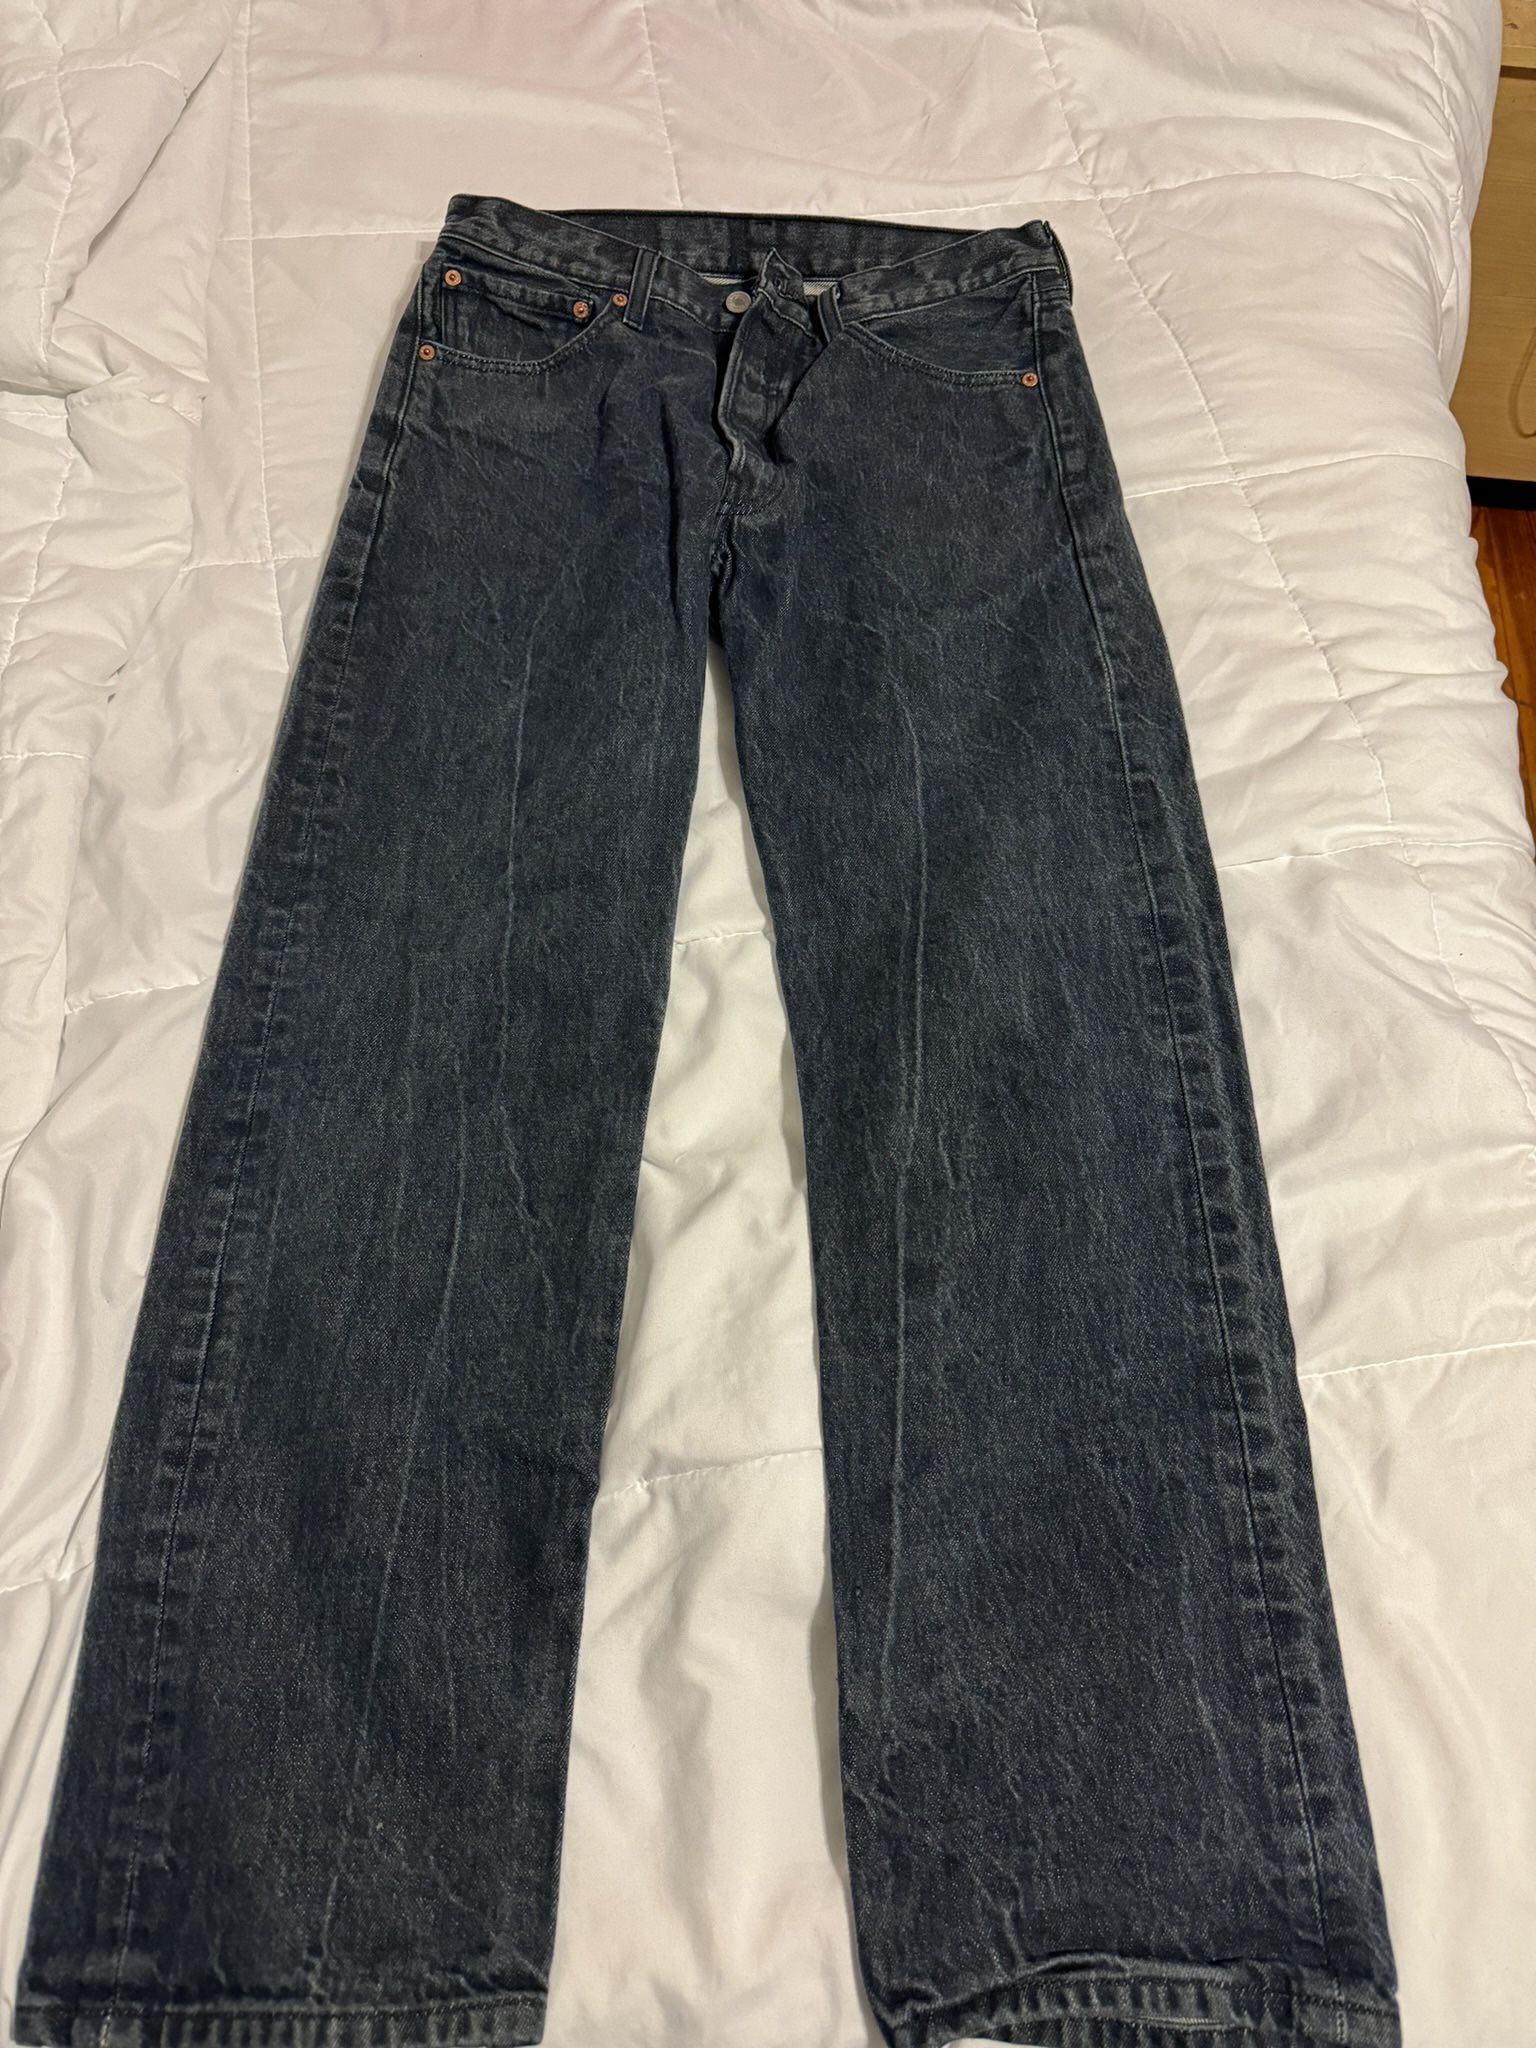 Levi’s 501 Jeans 33x32- Washed Blue